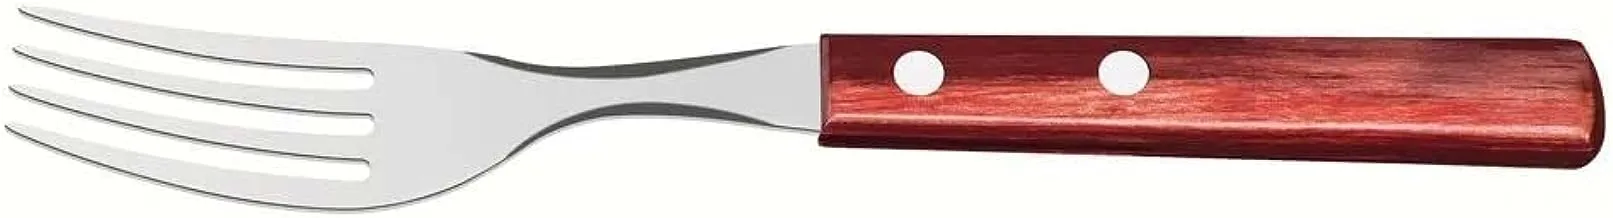 Tramontina 10 Inches Cooks Knife with Stainless Steel Blade and Pollywood Dishwasher Safe Handle